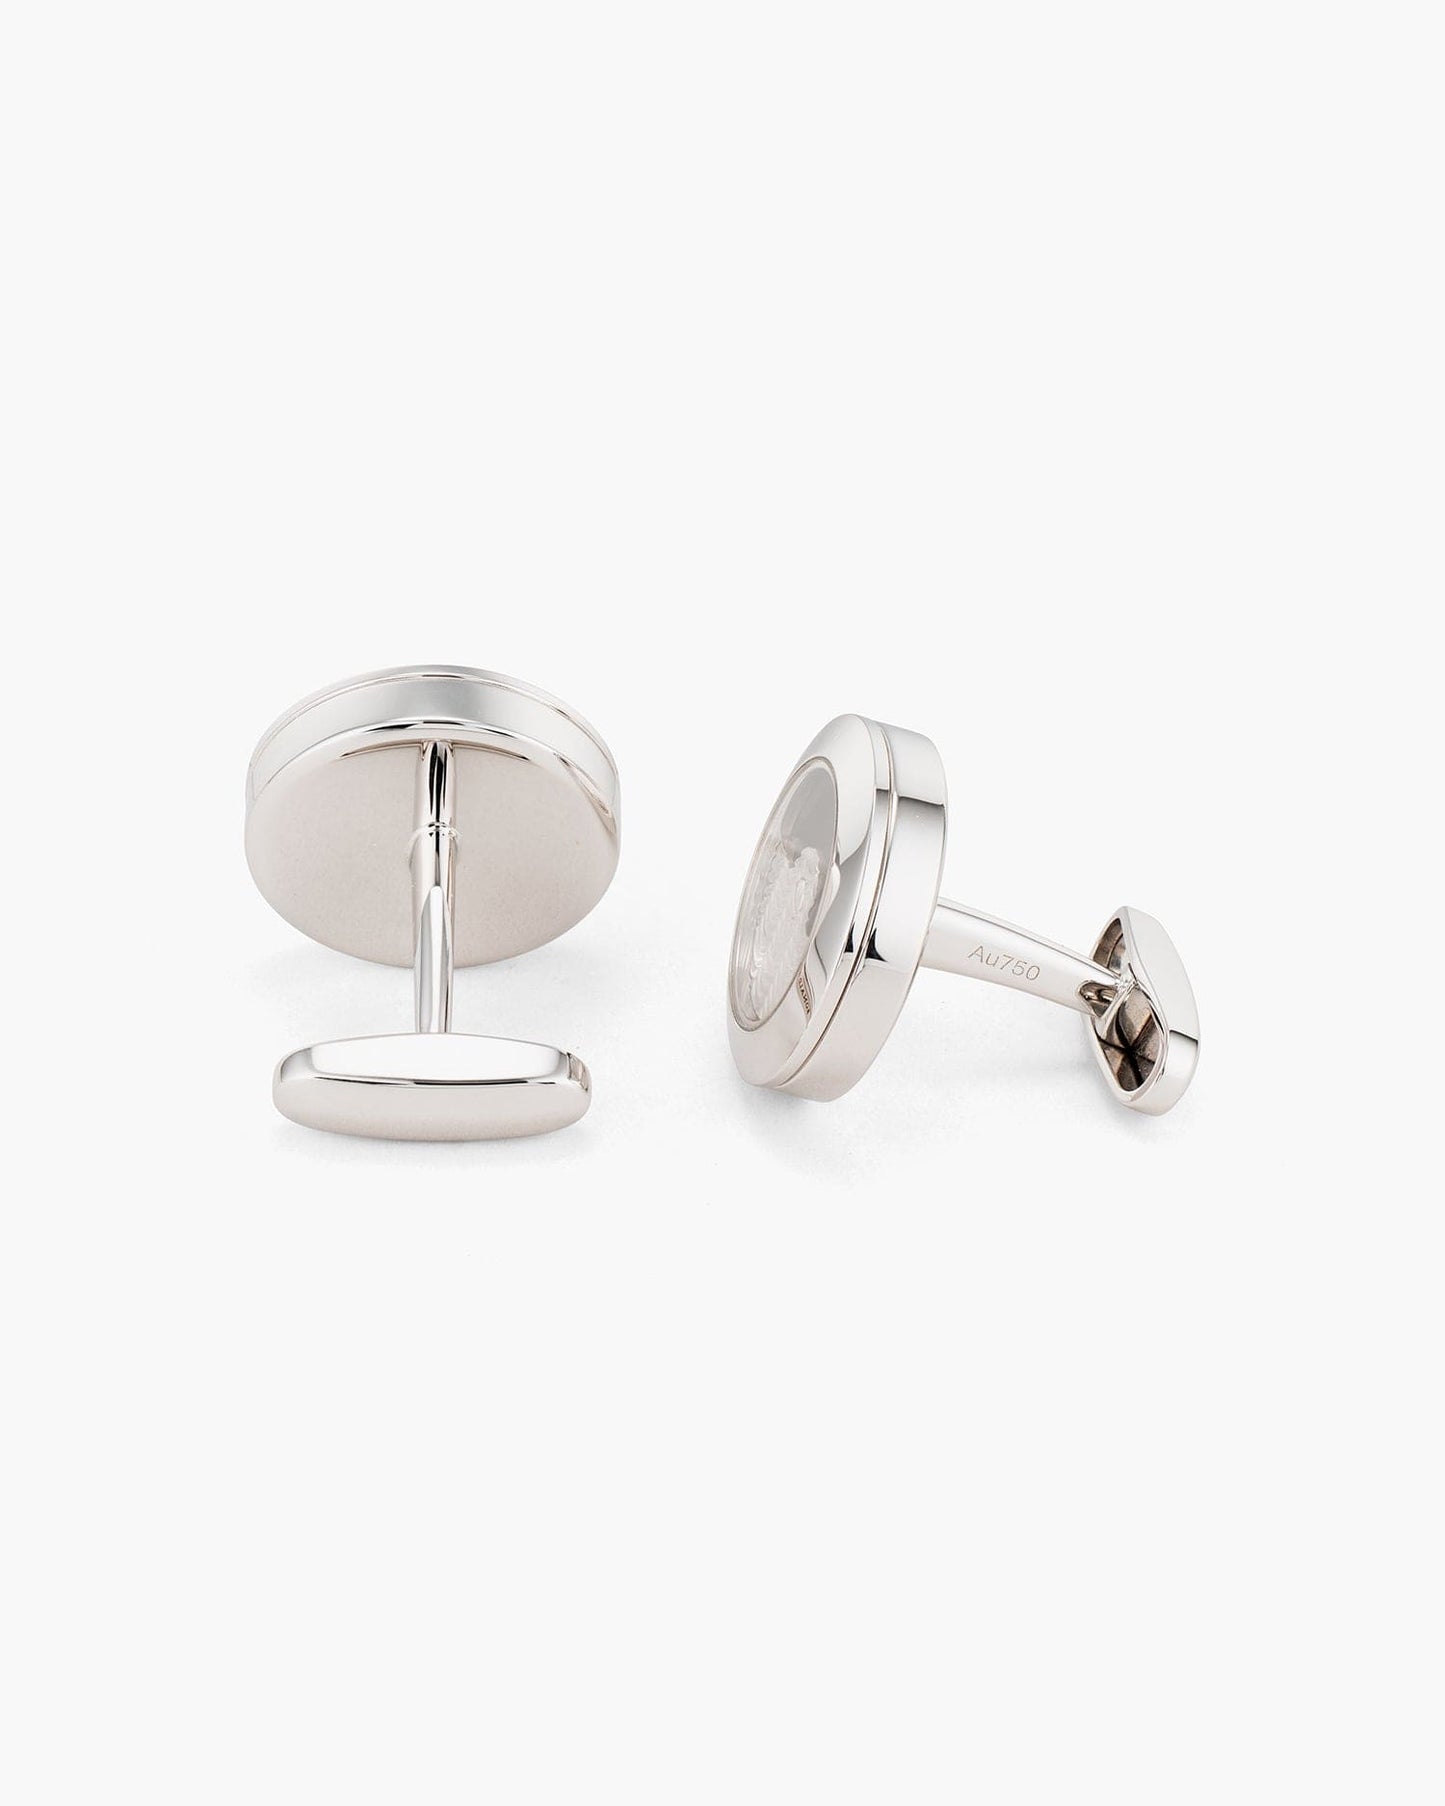 Mother of Pearl Rotor Cufflinks